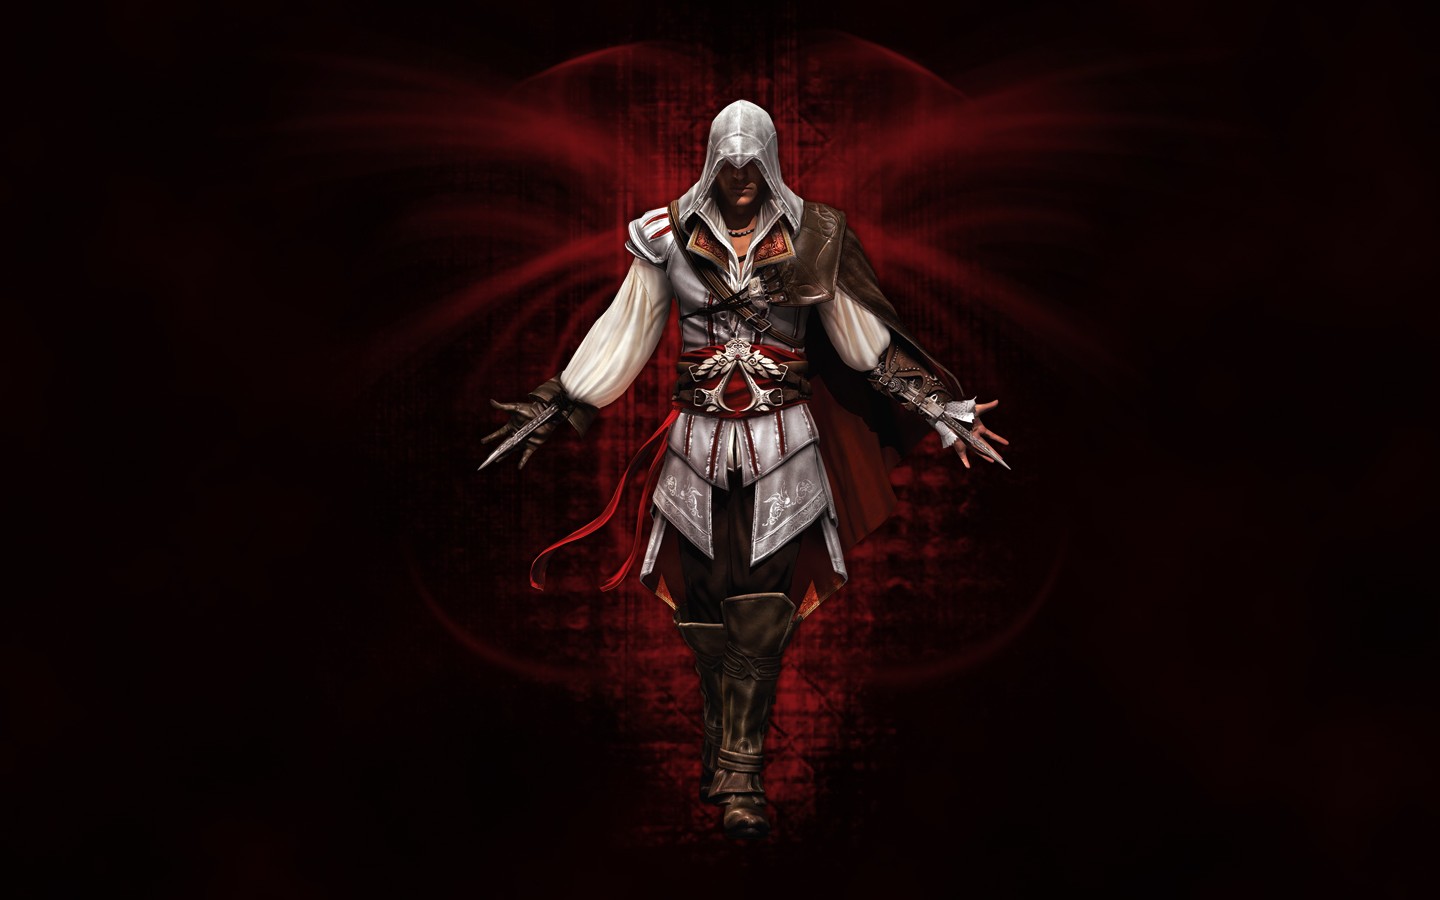 General 1440x900 Assassin's Creed II Ezio Auditore da Firenze video games PC gaming red background video game art standing video game man